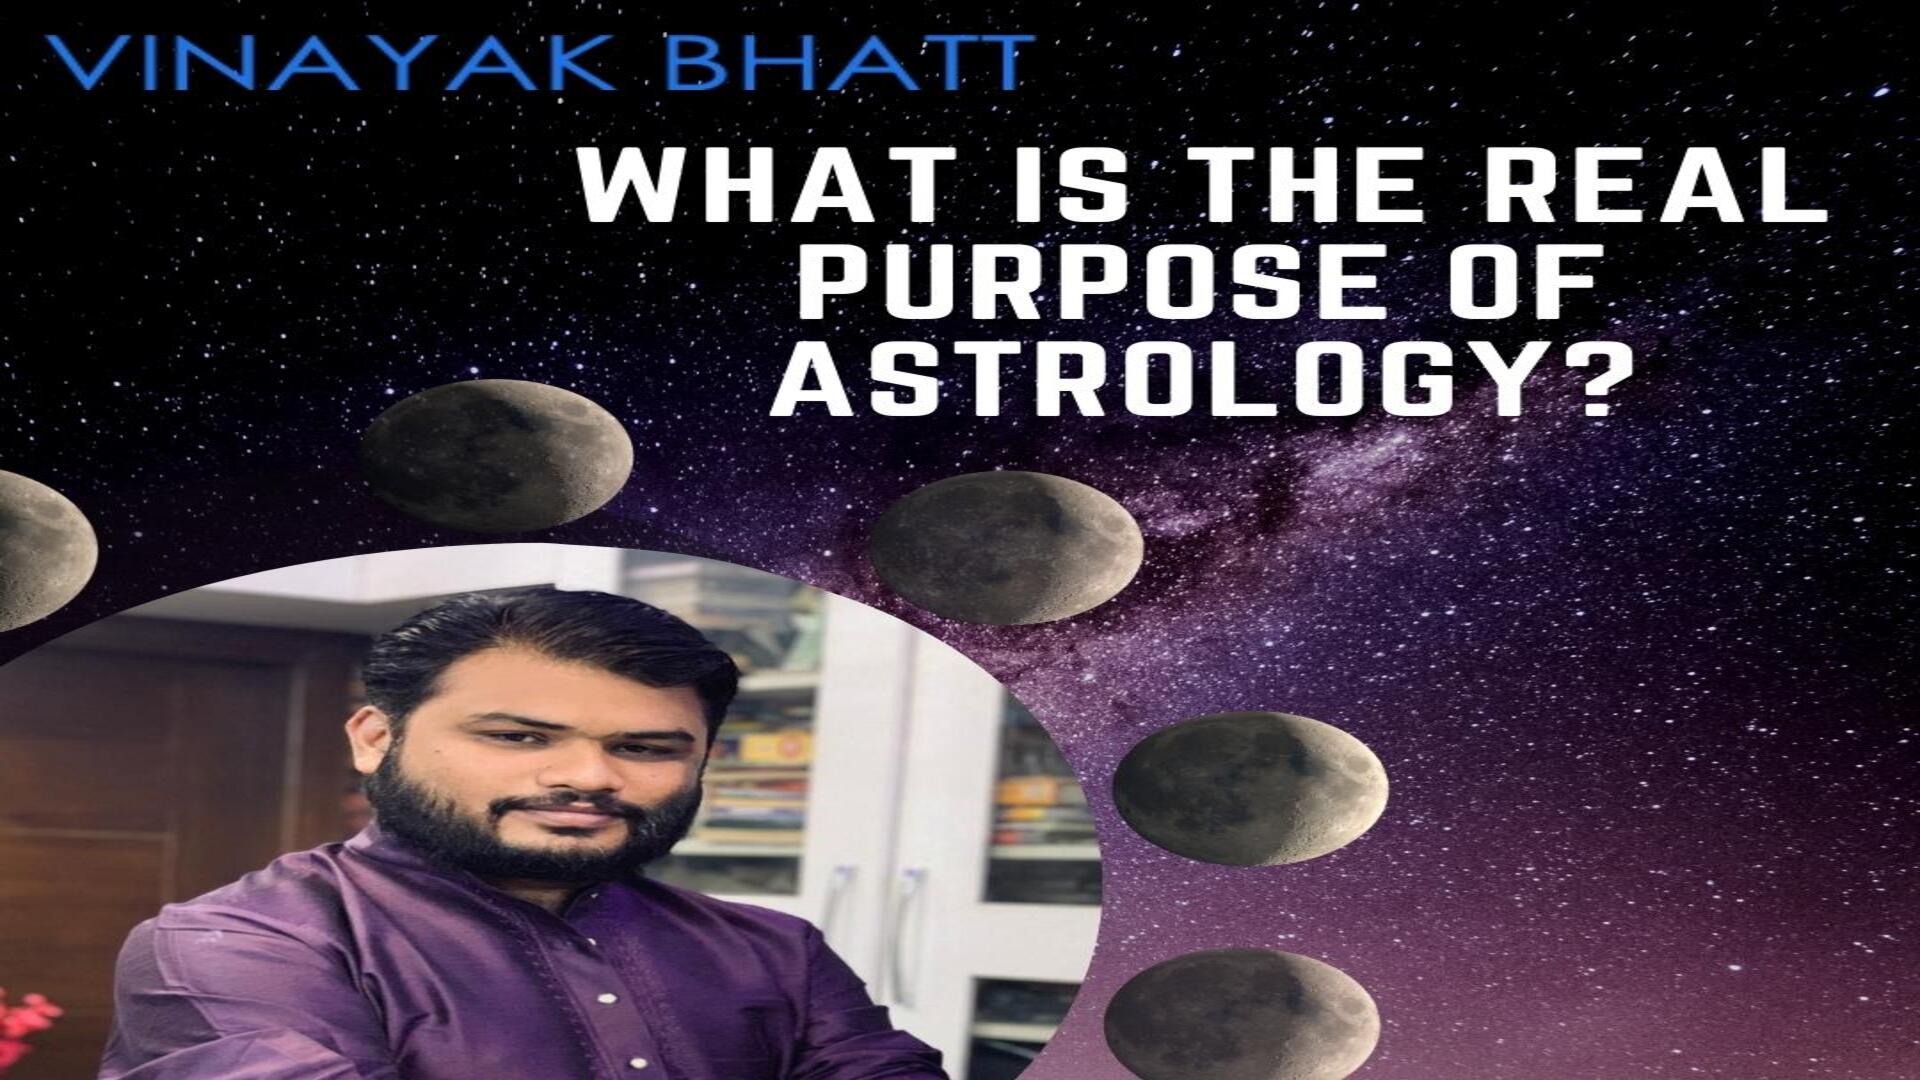 What is the Real purpose of Astrology